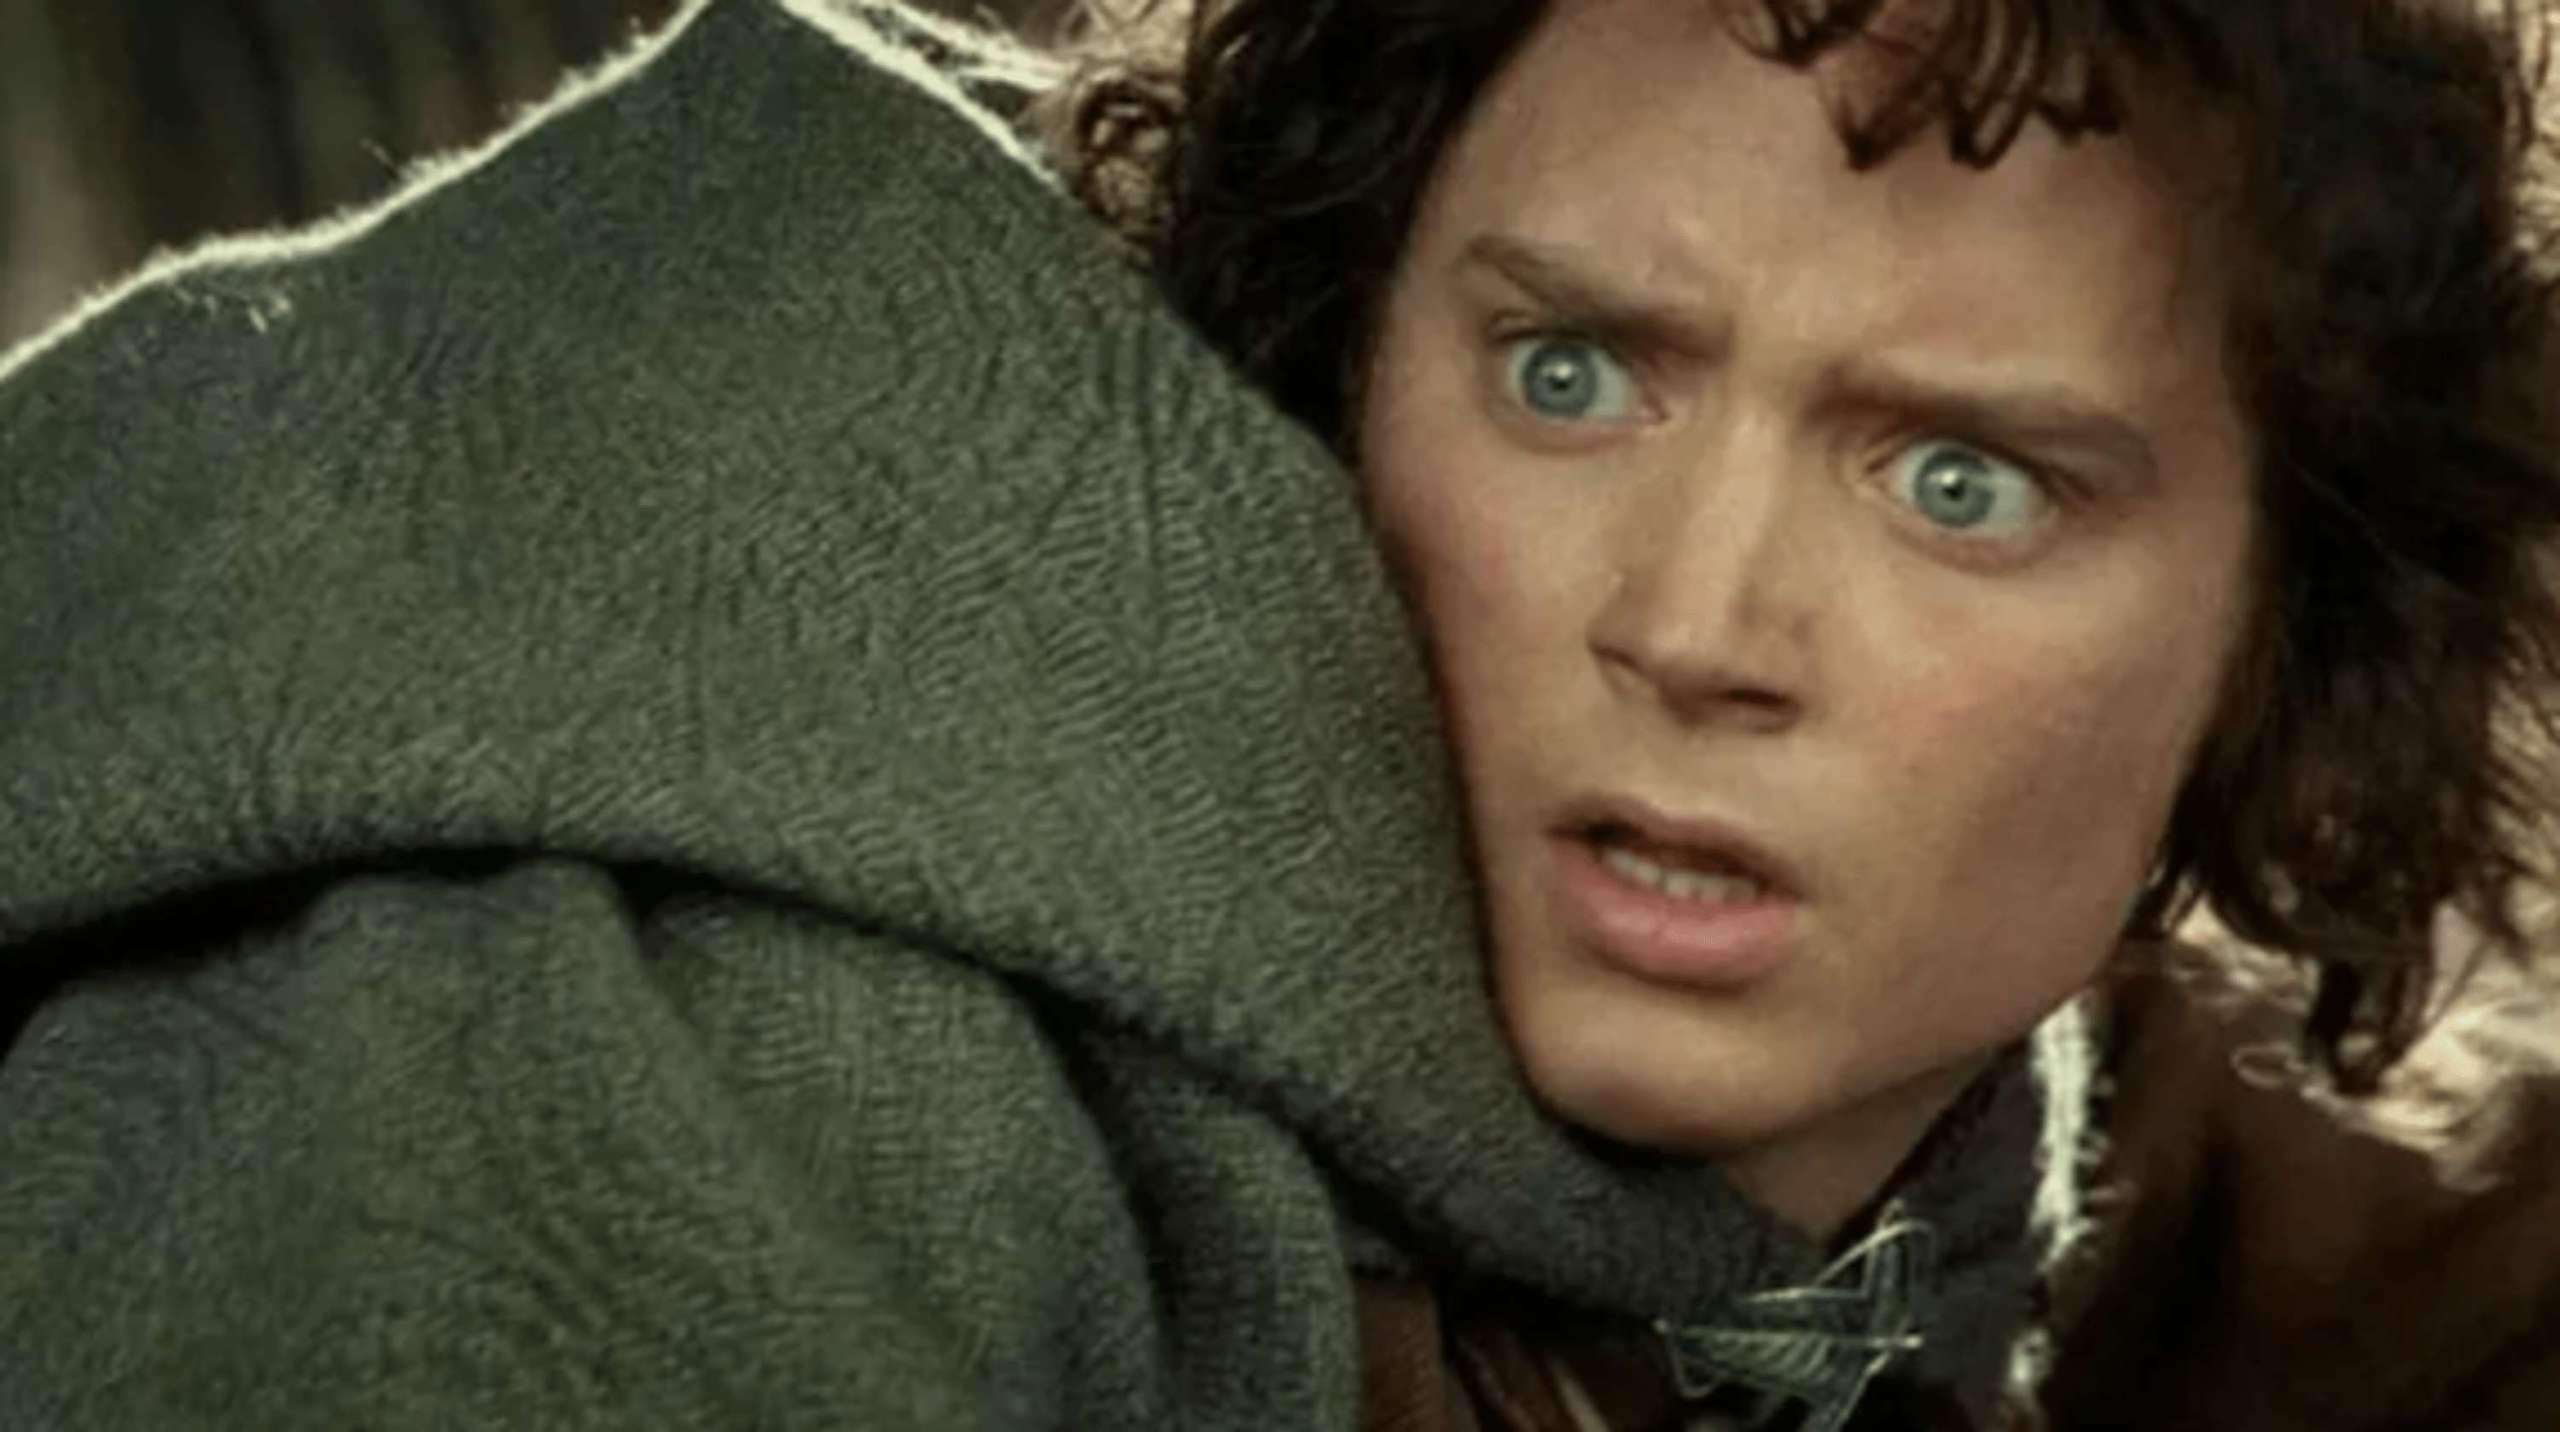 Weta Workshop And Private Division Are Releasing A New Lord Of The Rings Video Game That Is Separate From The Movies